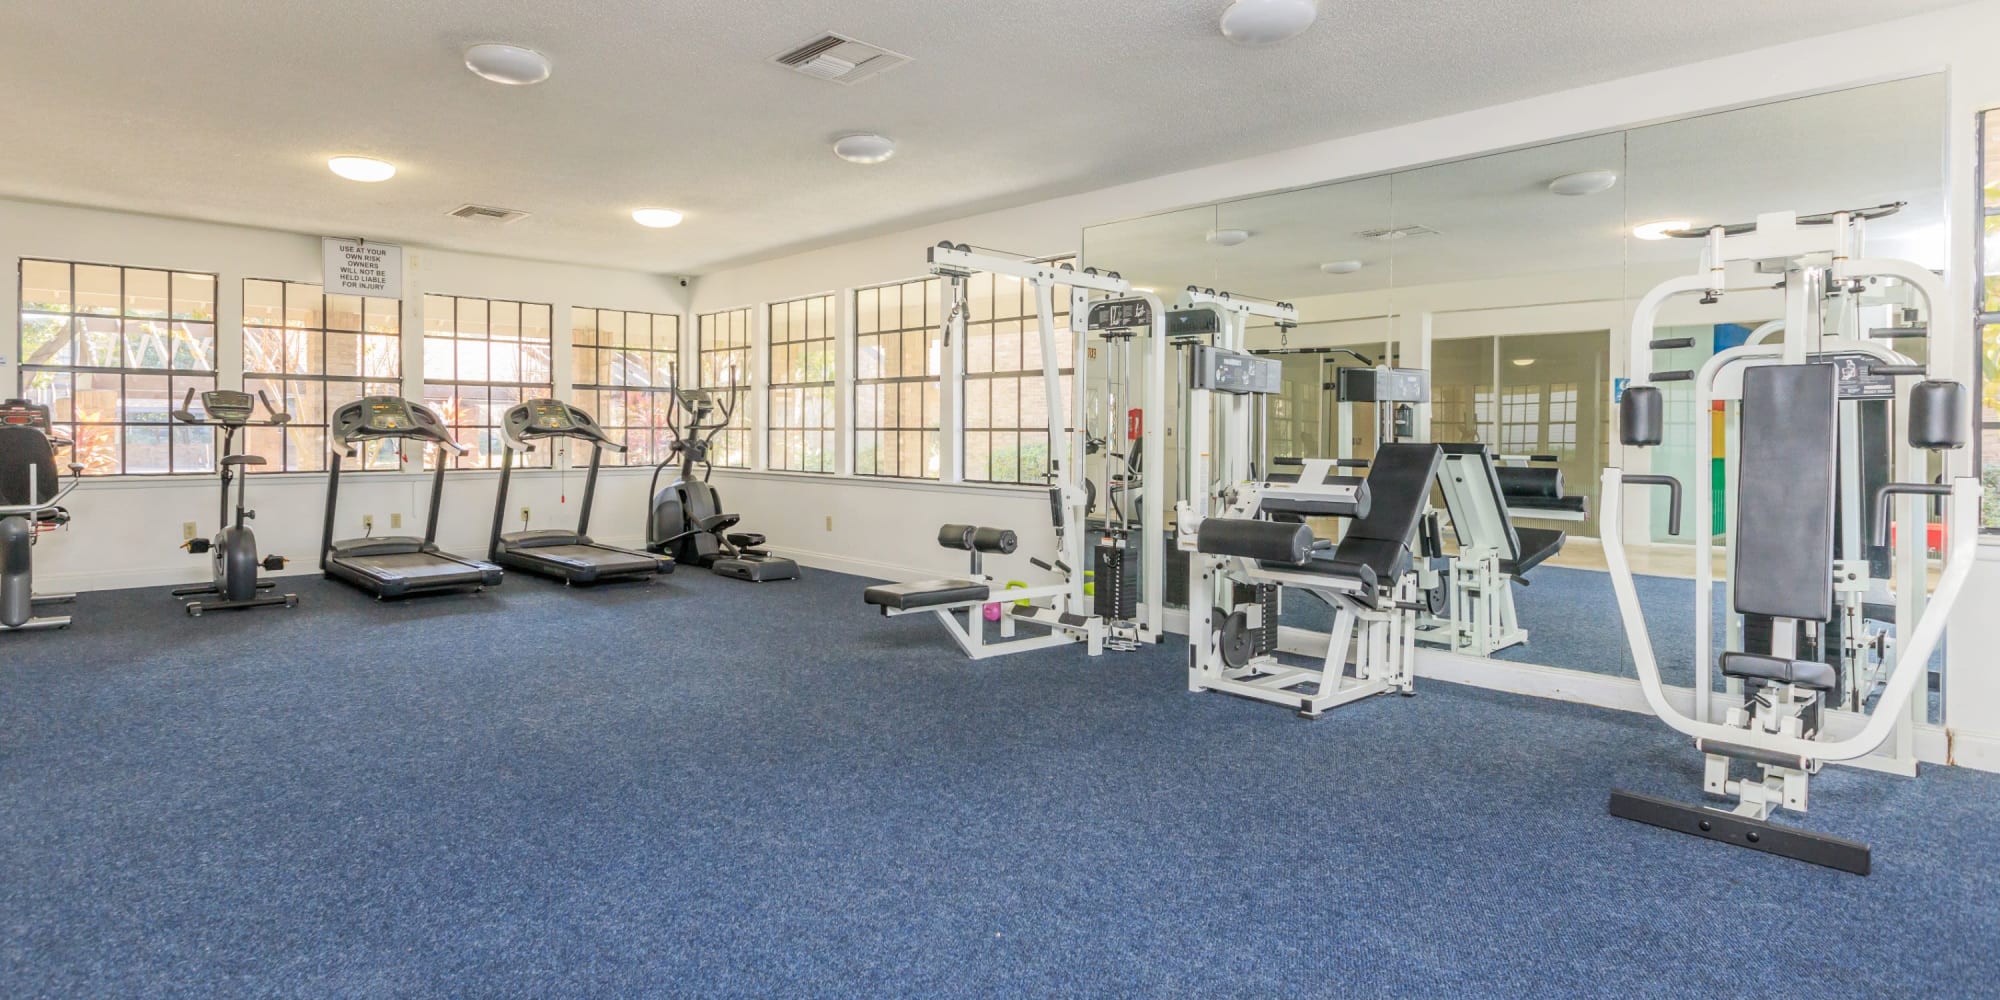 Orlando, FL Apartments with In-Unit Washer and Dryer - Millenium Cove - State-Of-The-Art Fitness Center with Strength Training equipment, Large Mirrors, and Large Windows